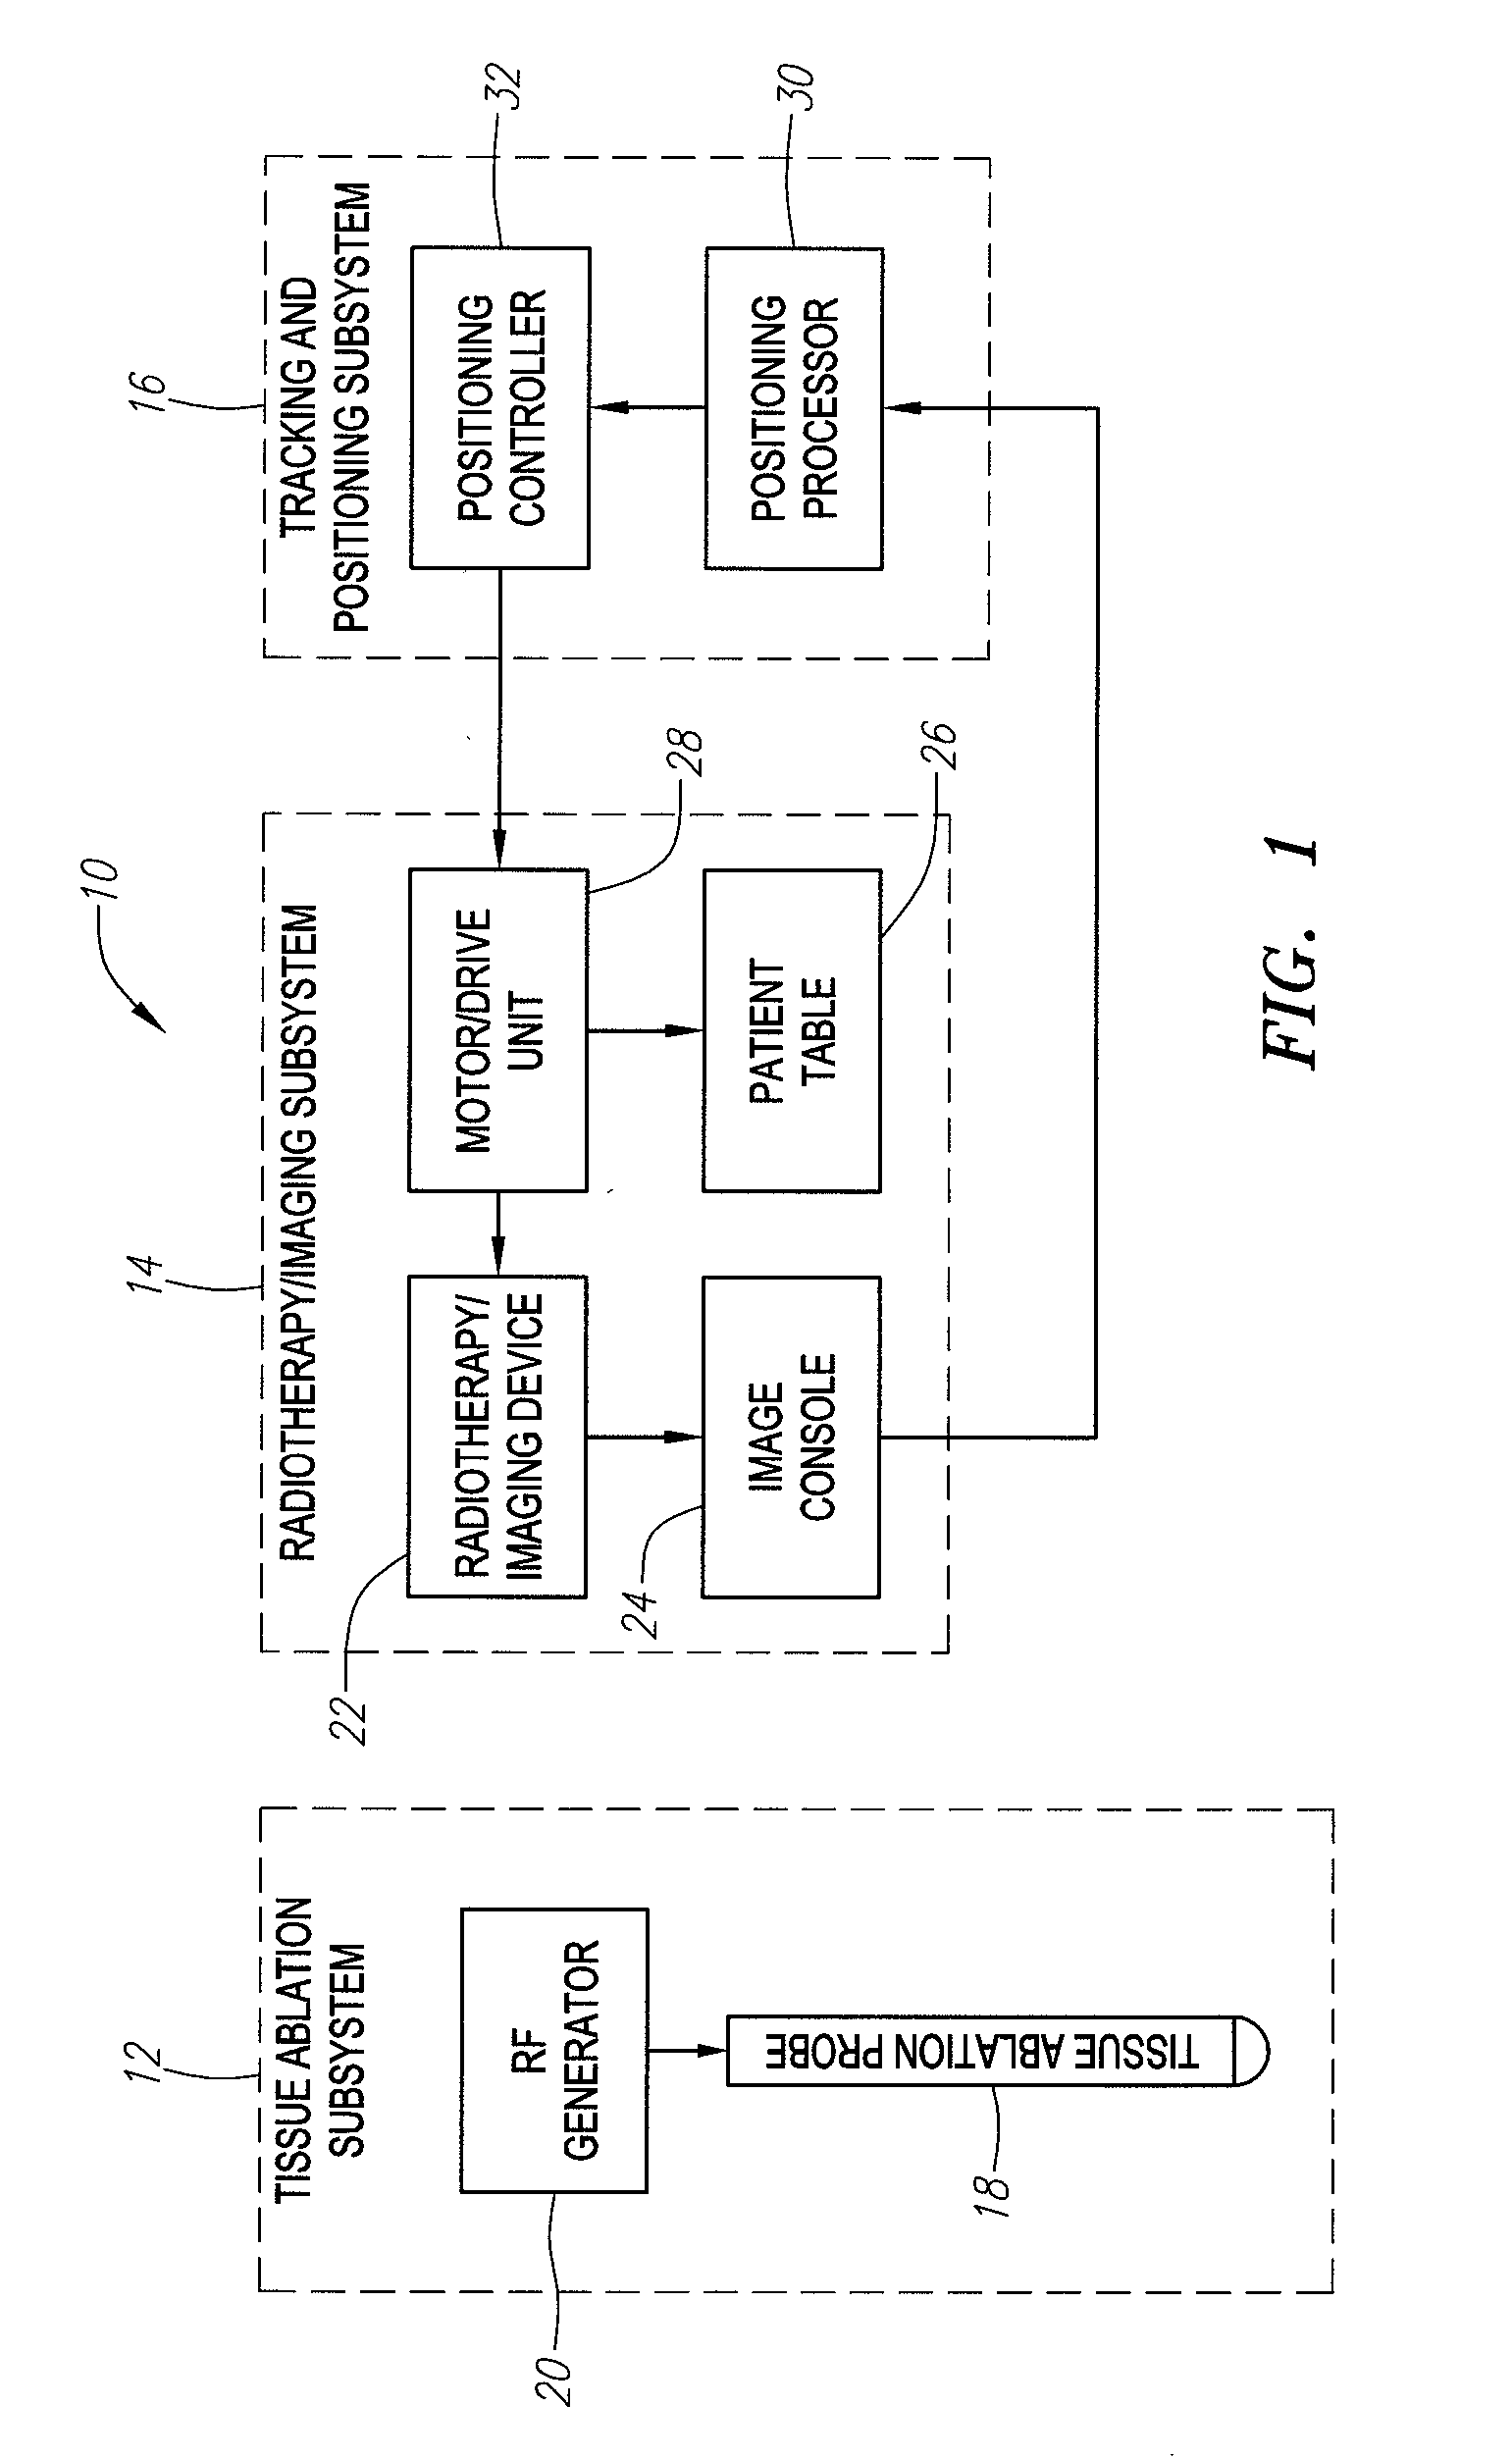 Radiation ablation tracking system and method